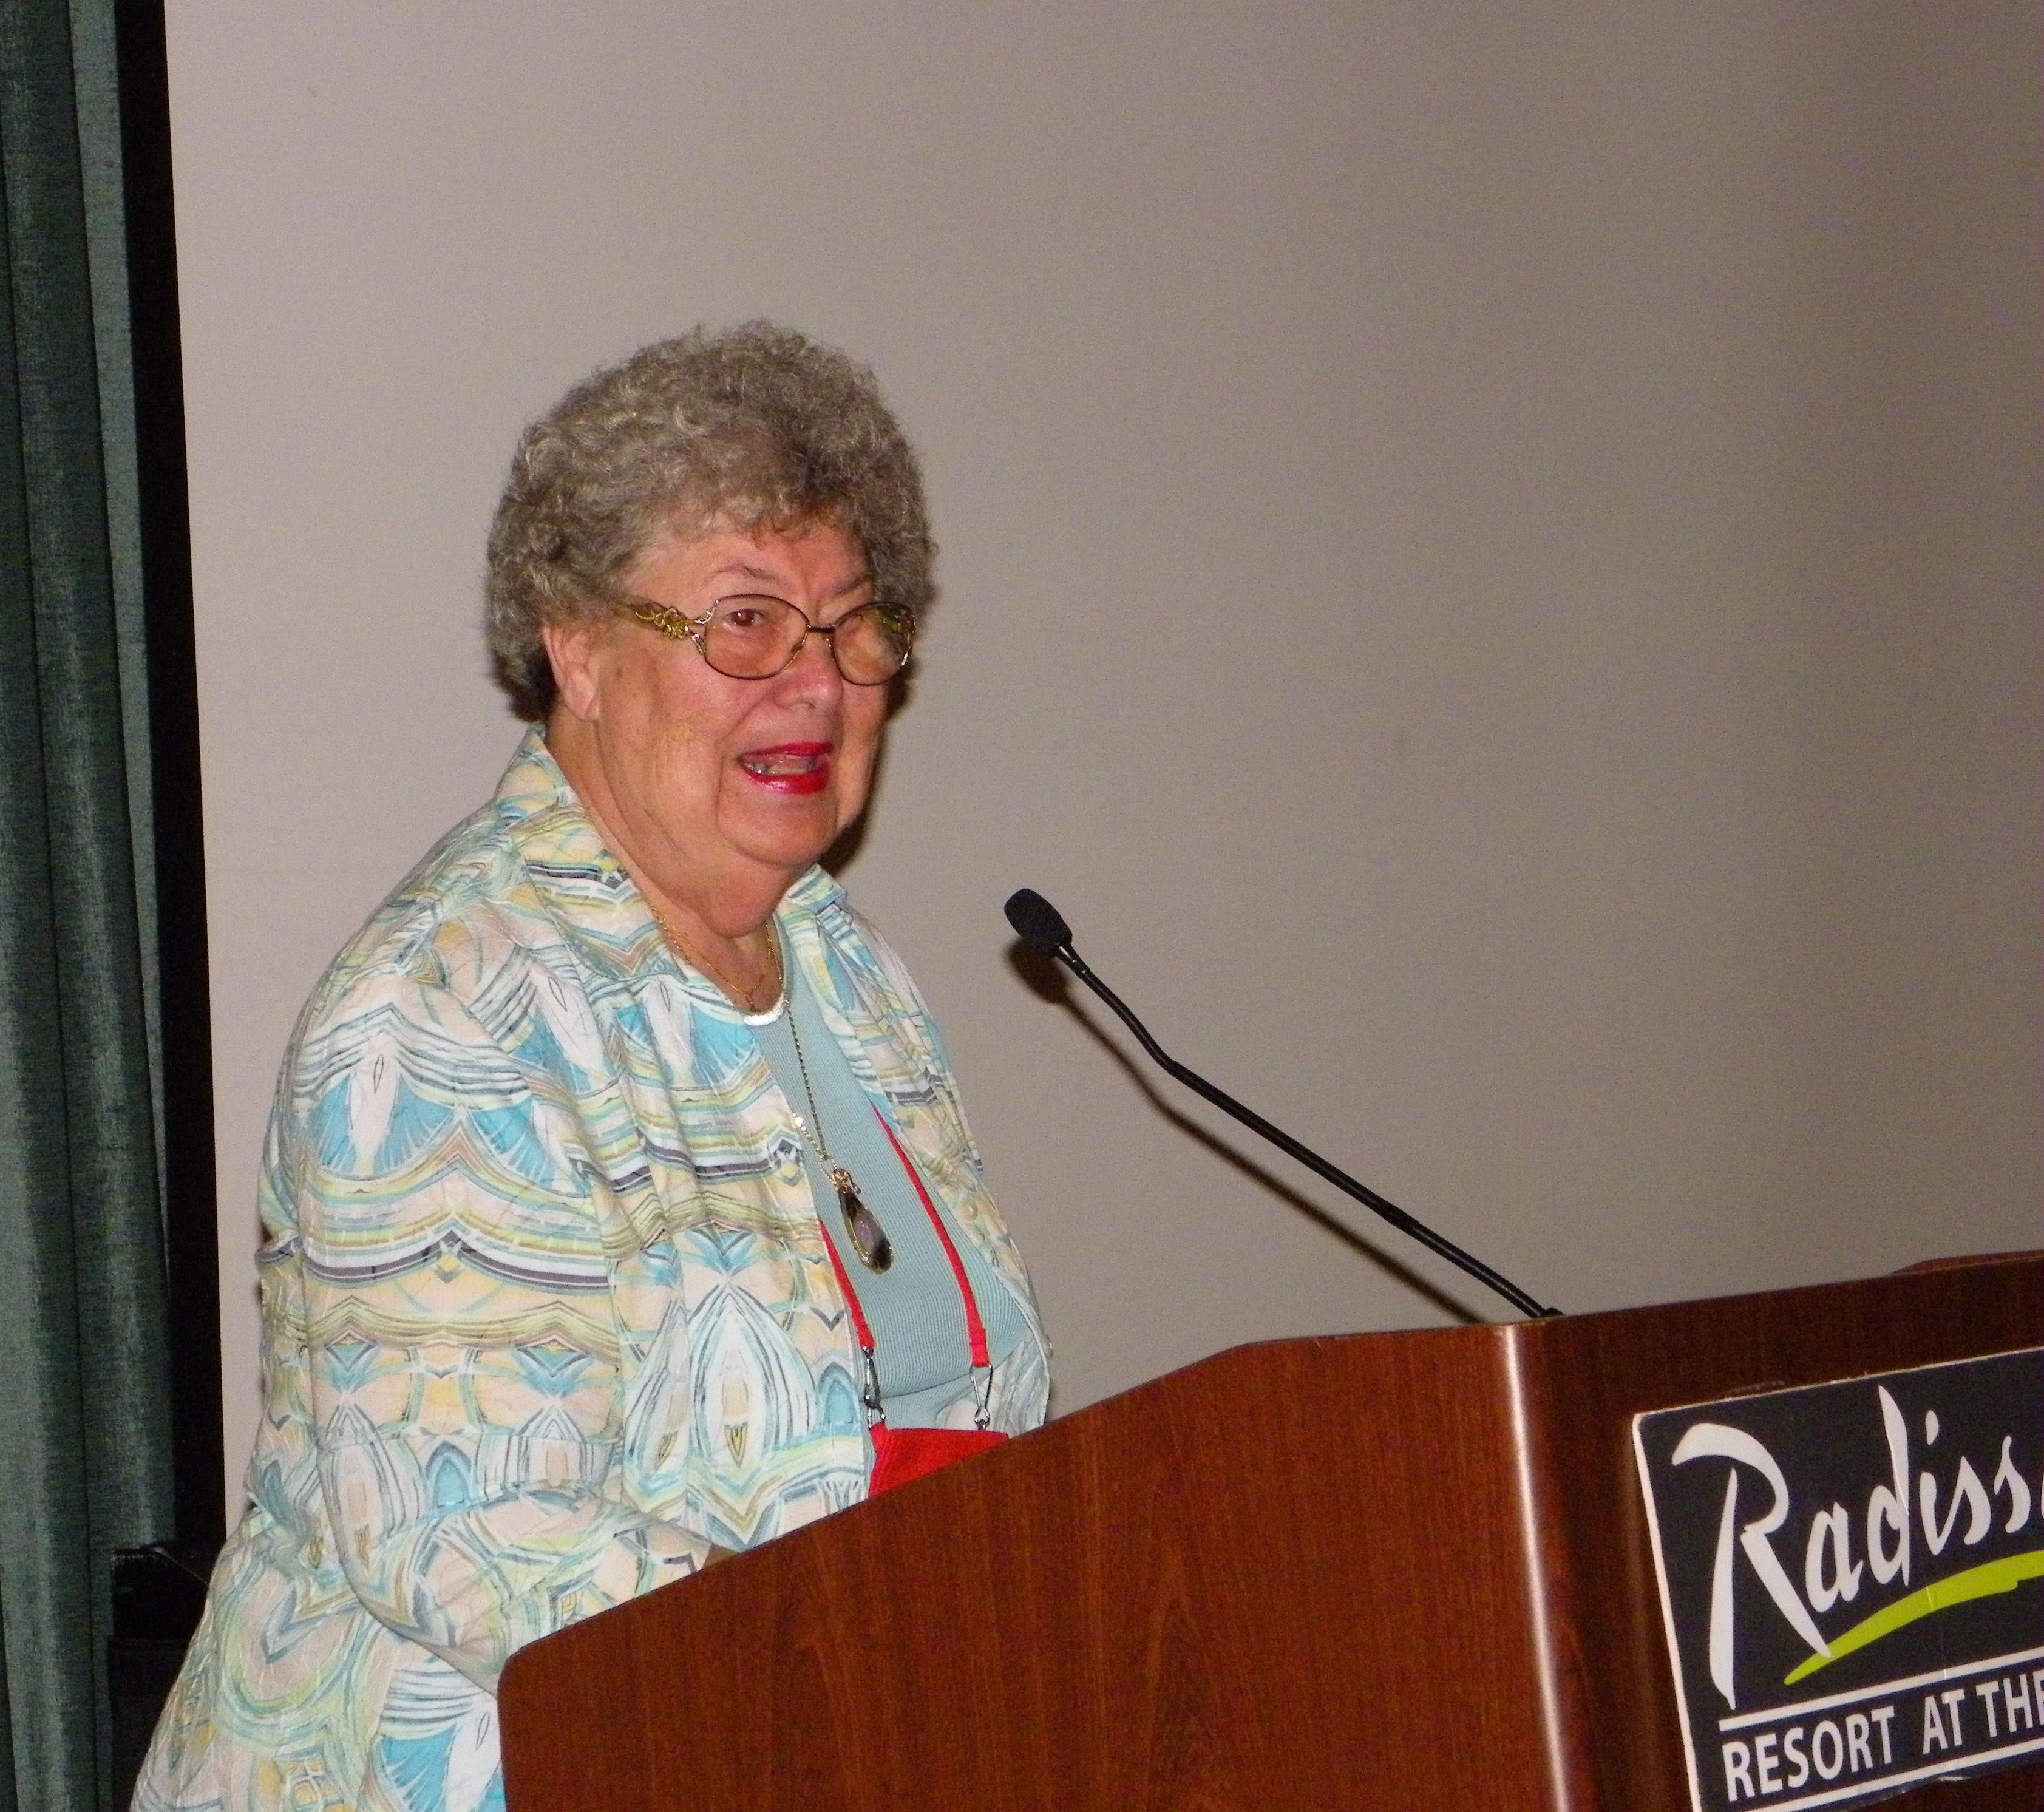 Doris Underwood, opening the 2011 COA Convention in Cape Canaveral, Florida